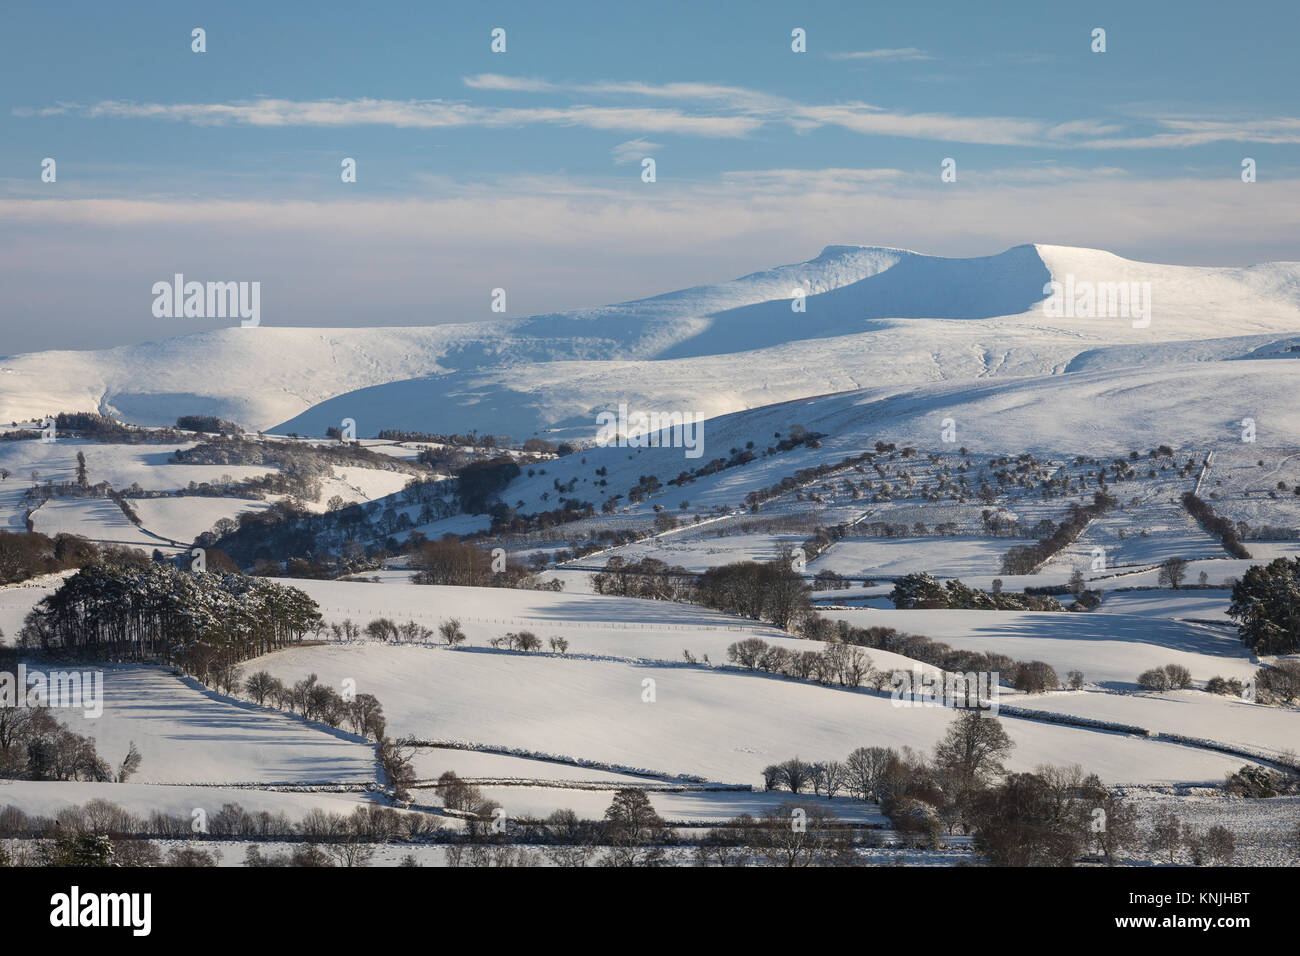 Paxton's Tower. UK. 11th December, 2017. Looking across the Brecon Beacons National Park towards the summits of the Pen y Fan massif. Wales. Credit: Drew Buckley/Alamy Live News Stock Photo